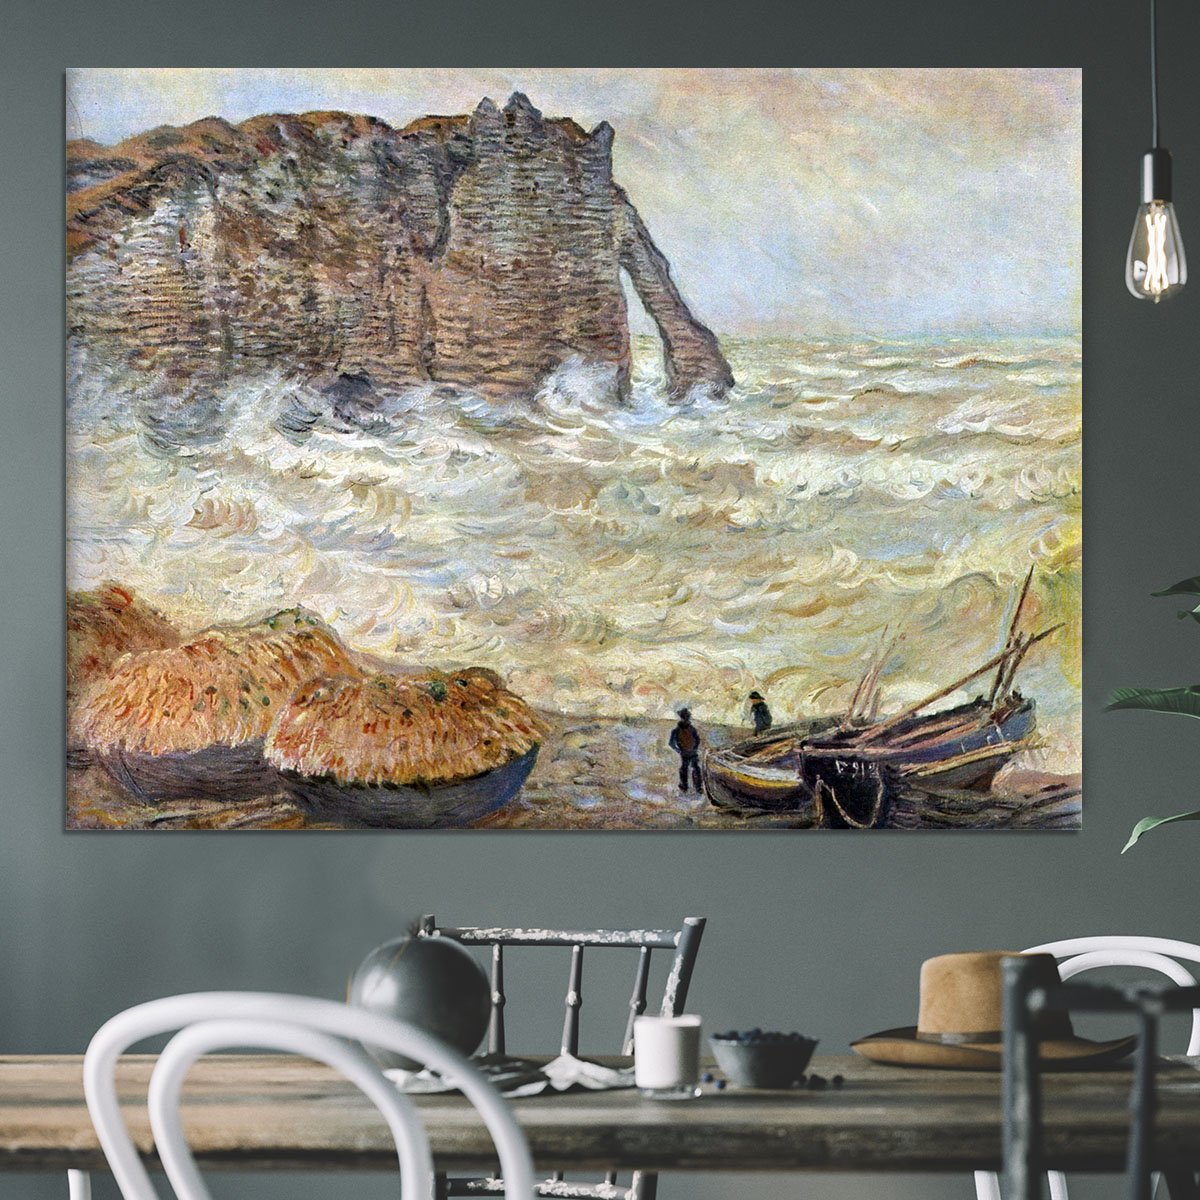 Stormy Sea La Porte d'Aval by Monet Canvas Print or Poster